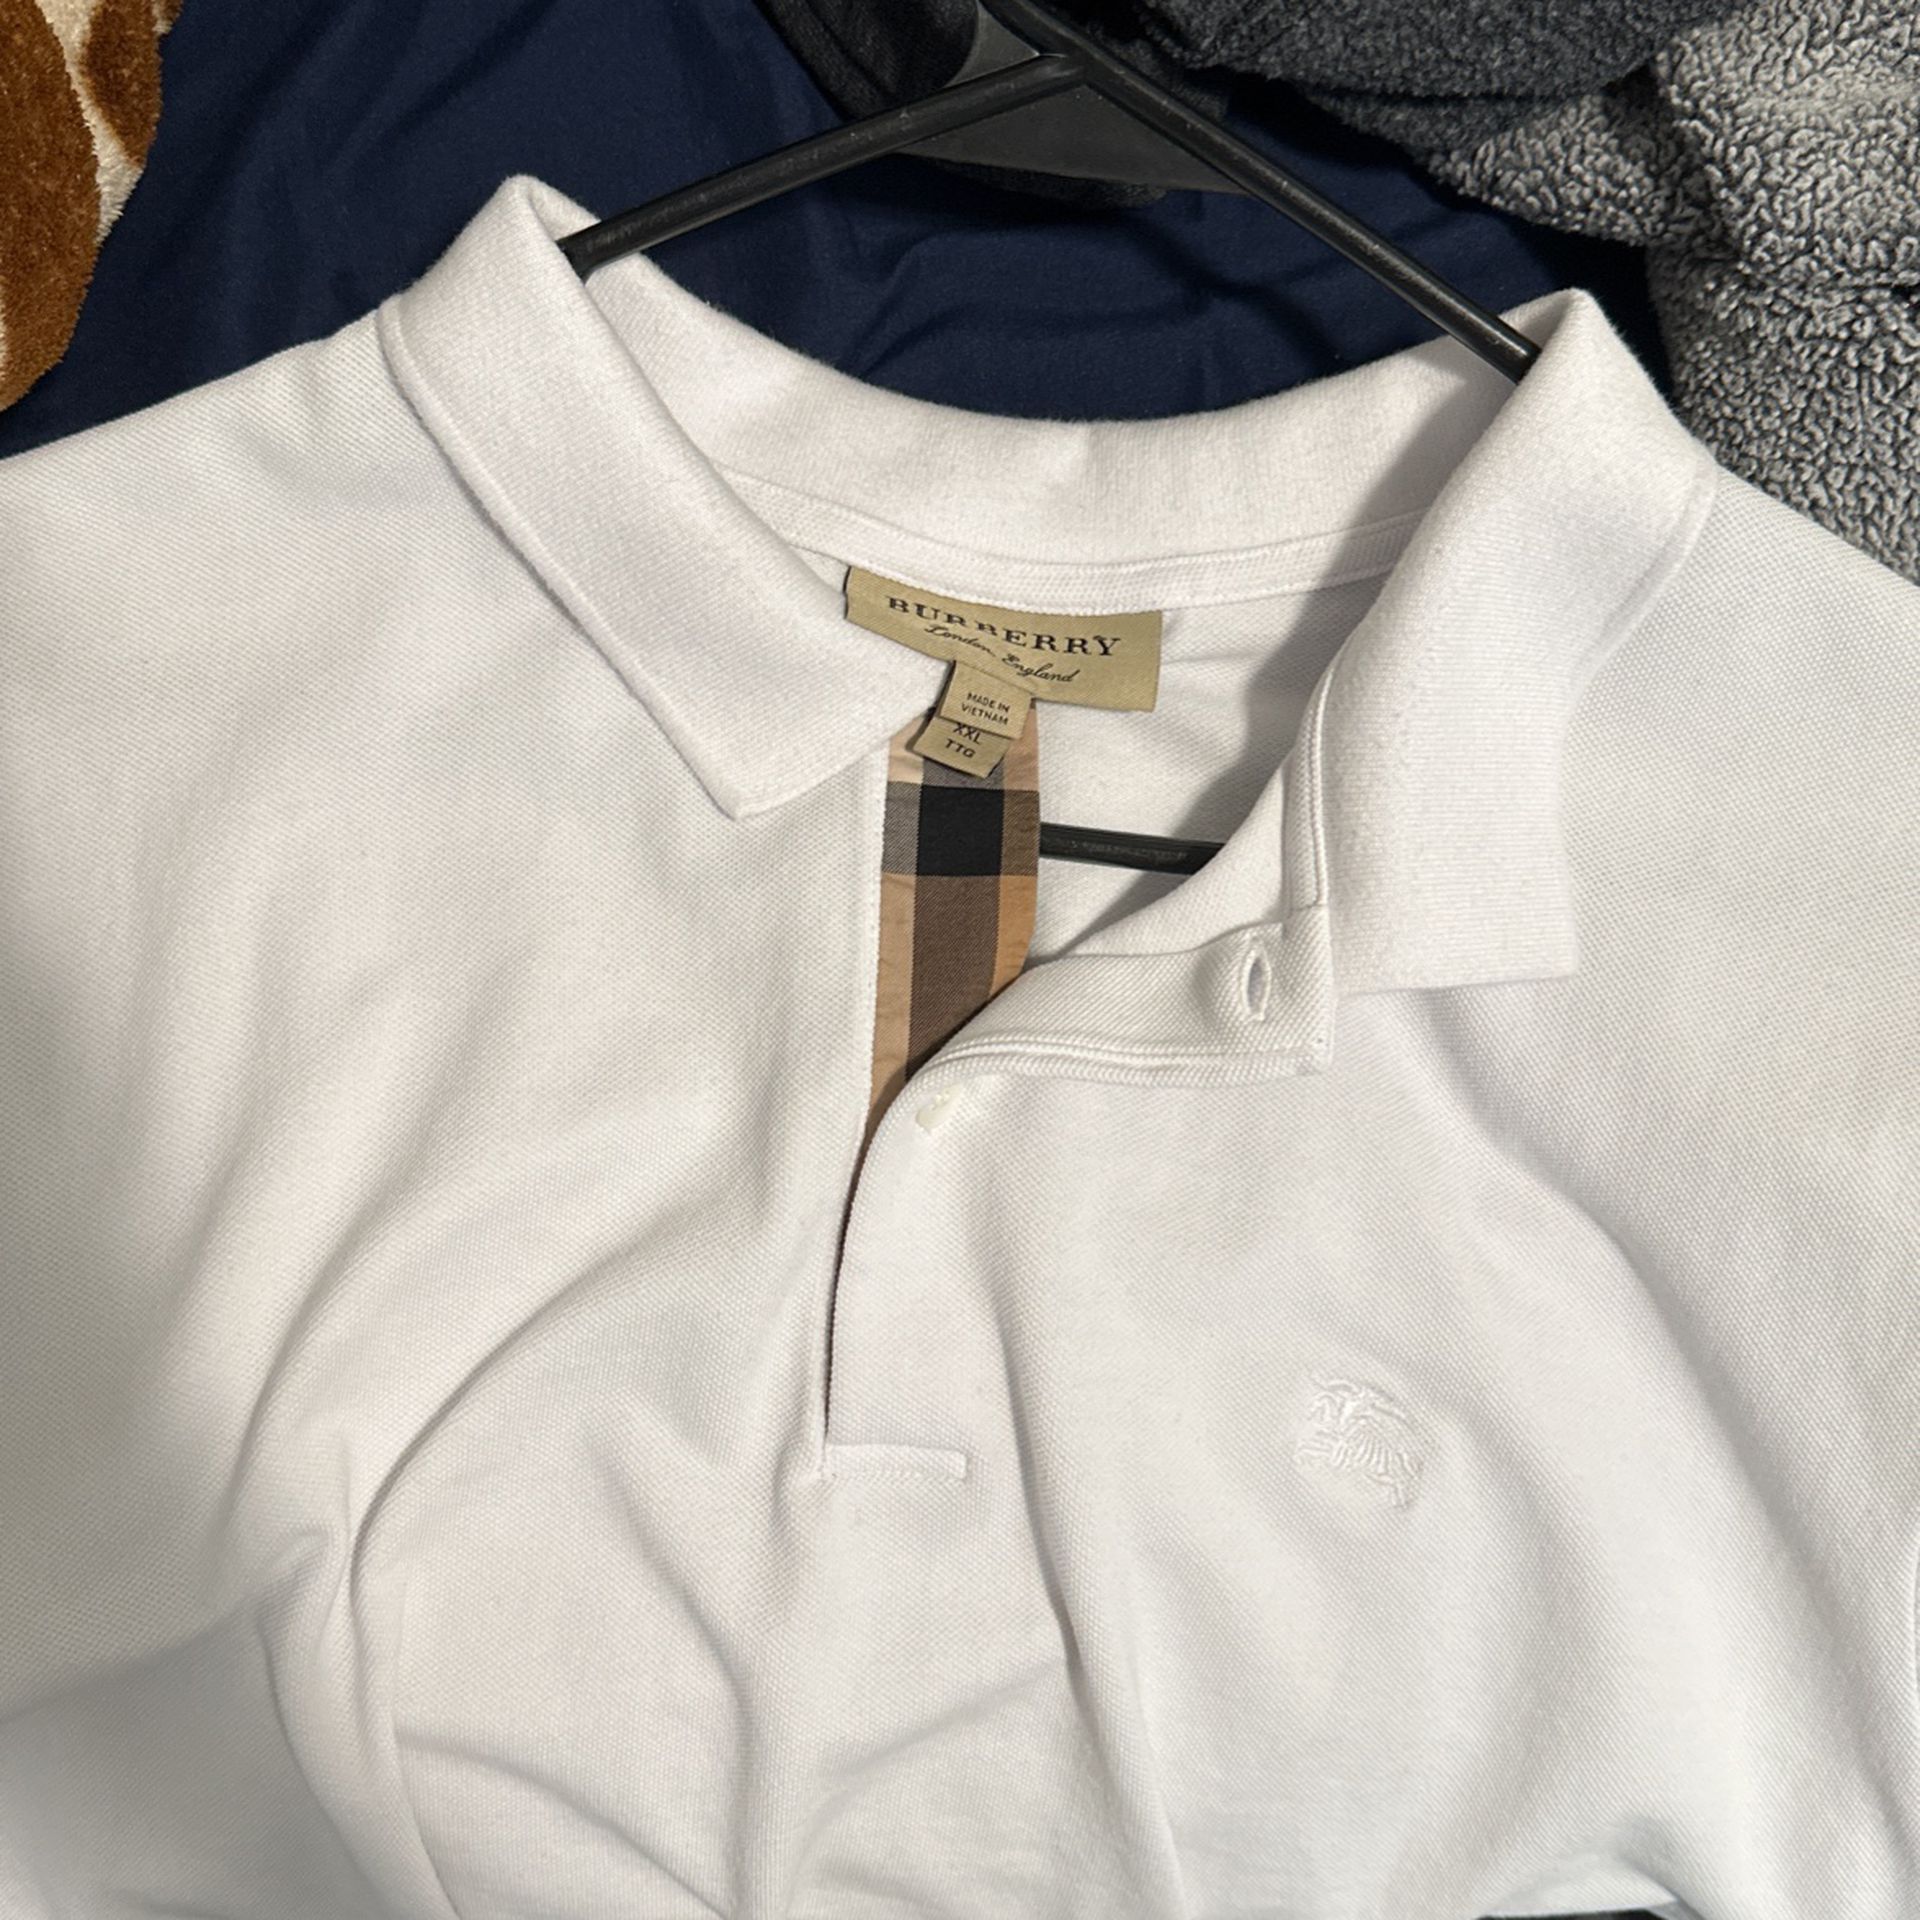 Authentic Burberry Collared Shirt